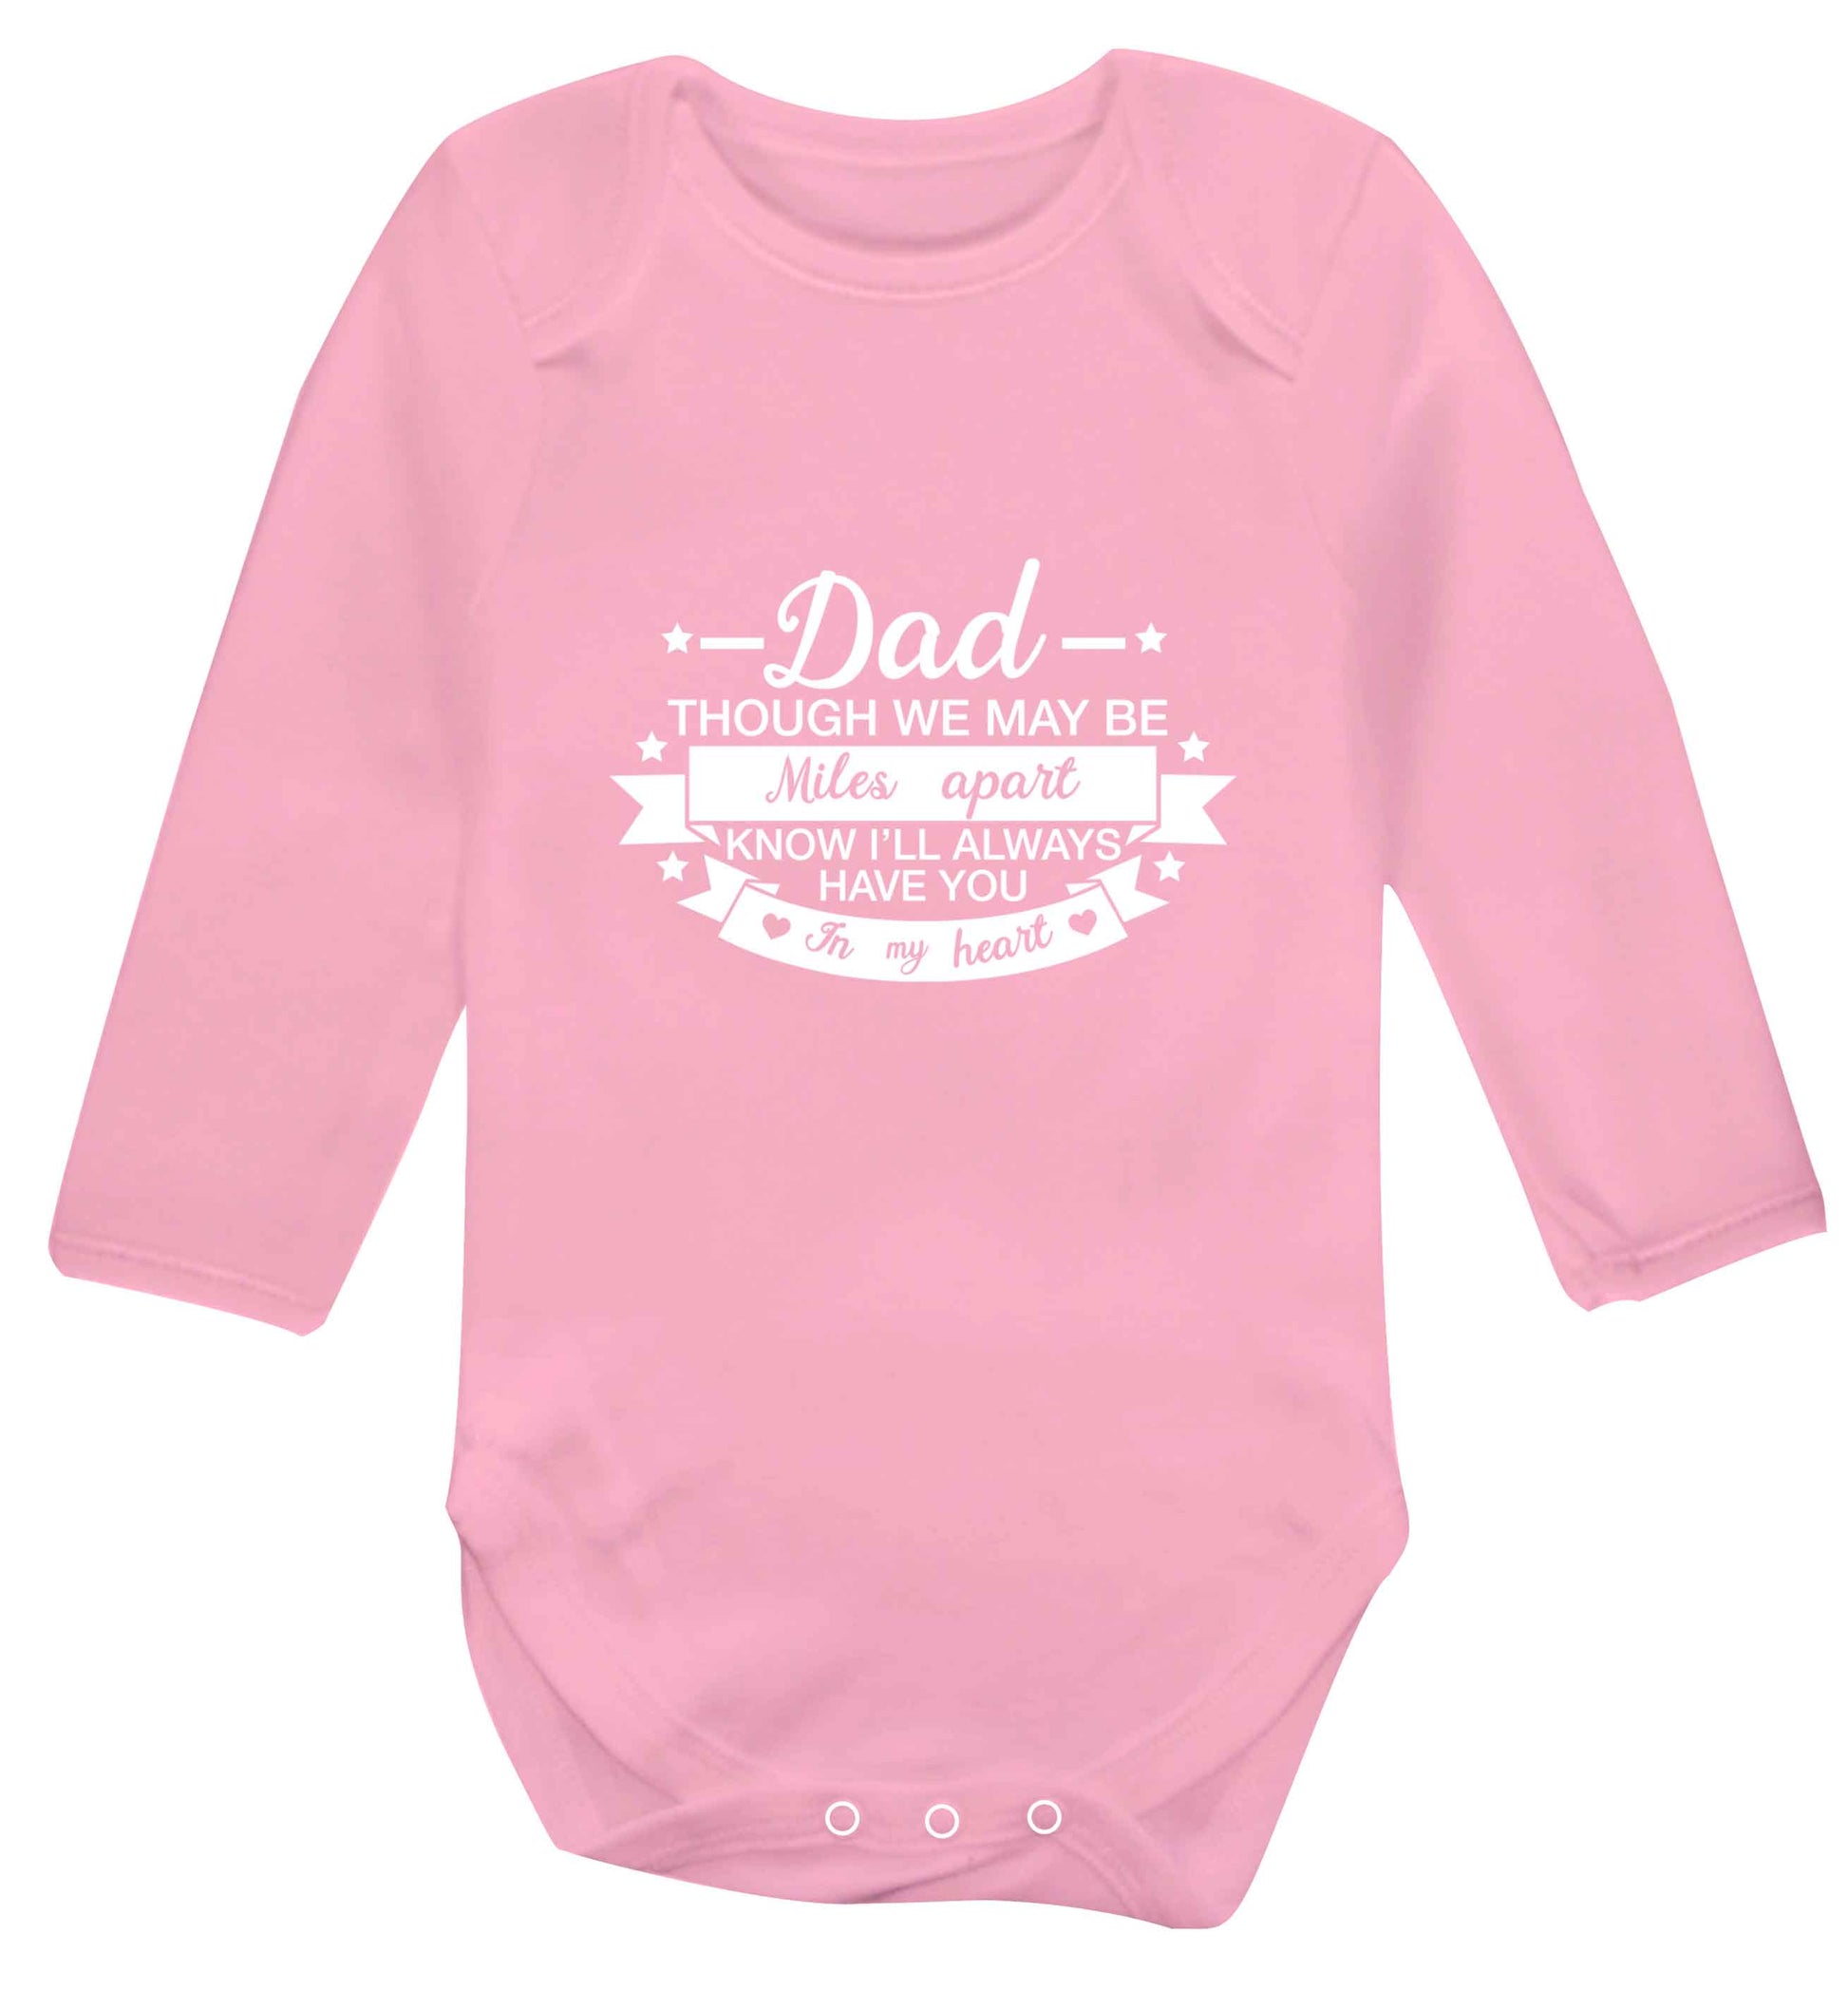 Dad though we are miles apart know I'll always have you in my heart baby vest long sleeved pale pink 6-12 months